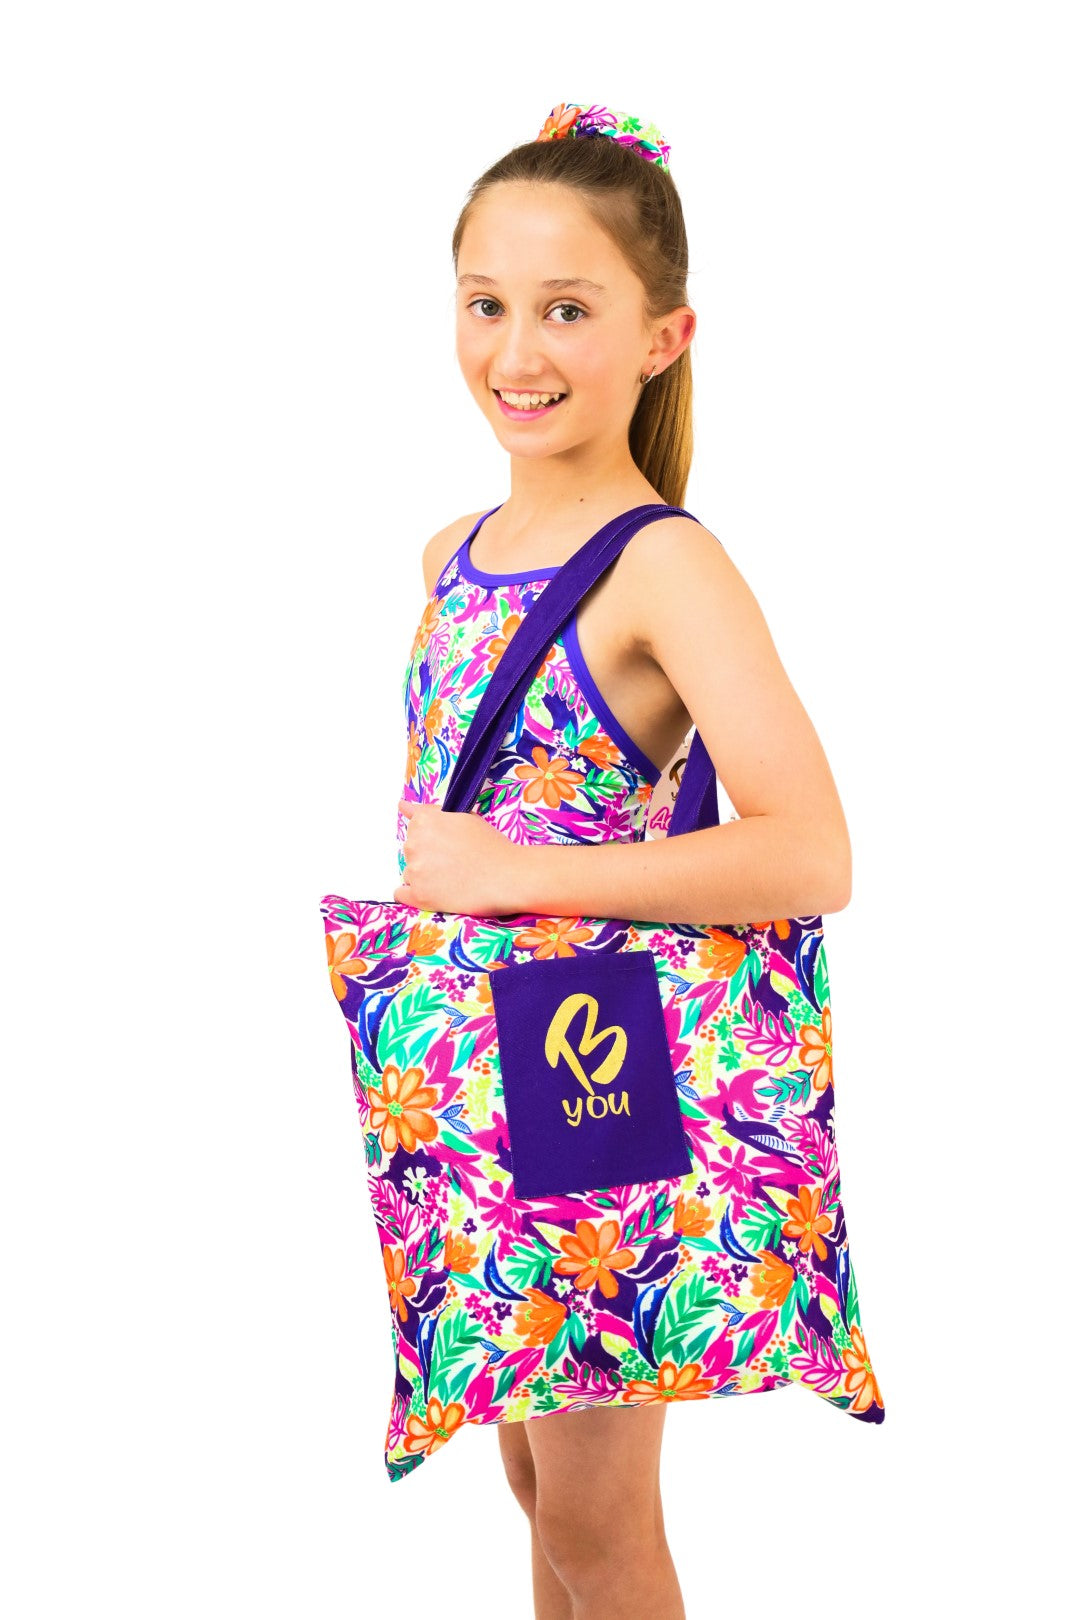 Tropical and Purple Canvas Tote Bag. Reversible. Features Green, Purple and Orange Tropical Print. Perfect for Active and Sporty Girls. B you Active, B you Leotards, B you Swimwear for girls. Activewear for kids. Gymnastics and Dancewear. Leotards and Sports.